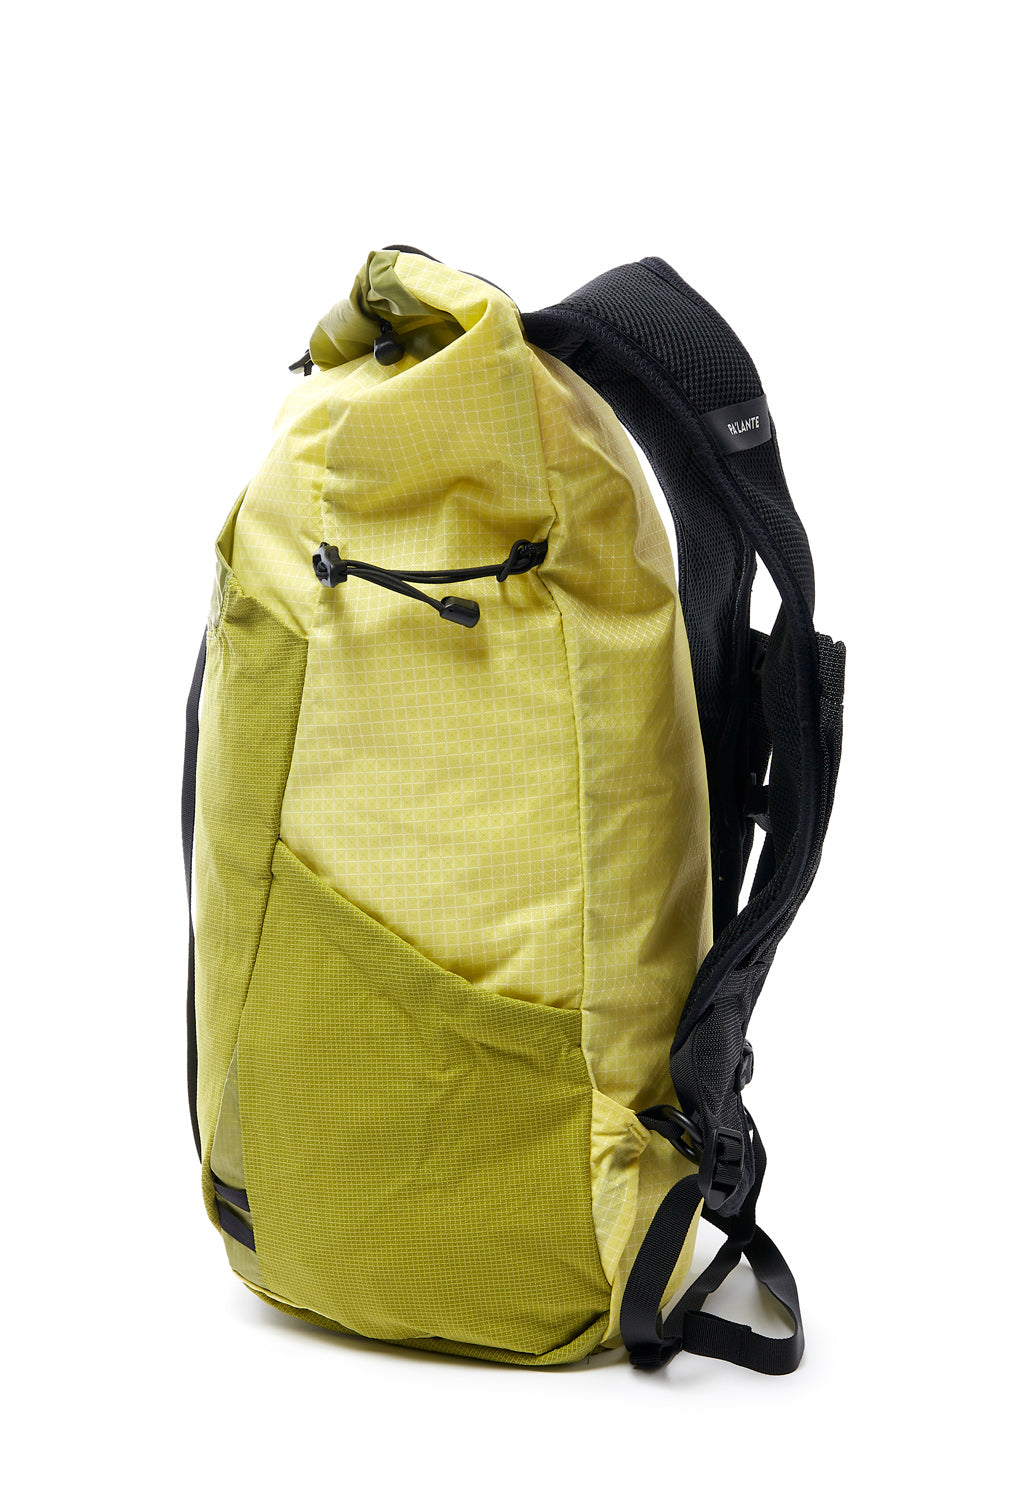 Pa'lante Packs Joey Pack - Daisy Gridstop / Lichen Uhmwpe Grid Mesh